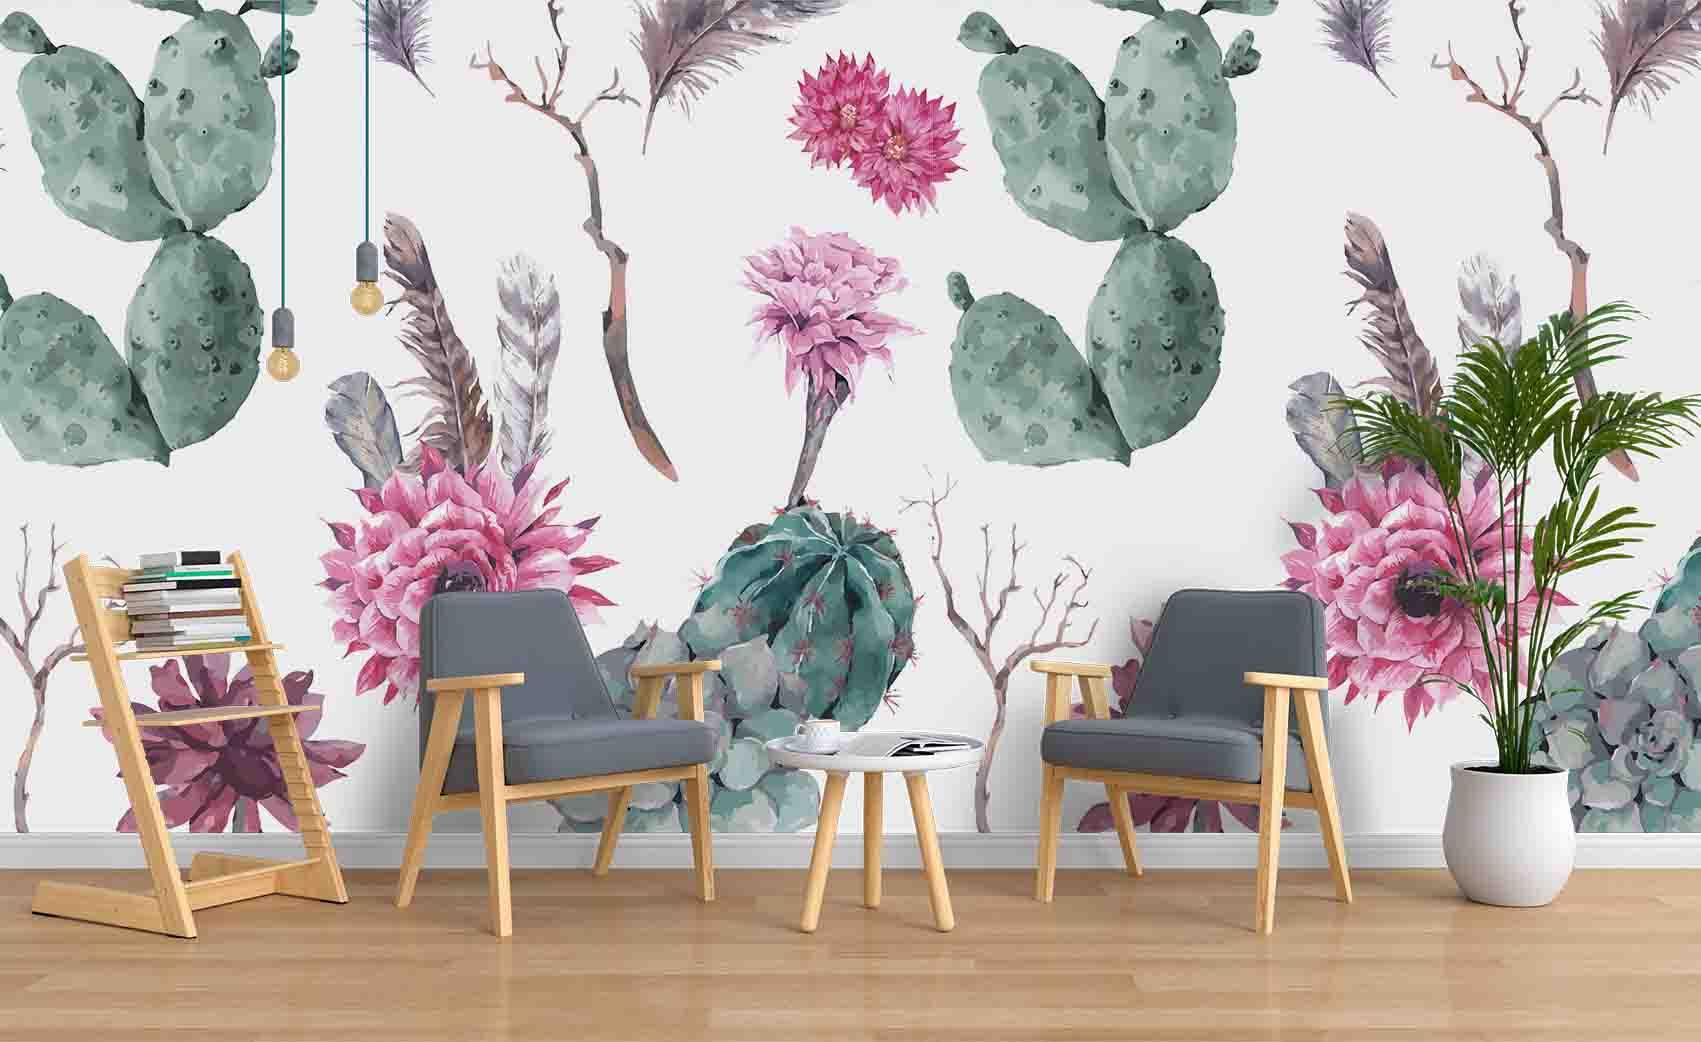 3D Cactus Flowers Feather Wall Mural Wallpaper SF39- Jess Art Decoration